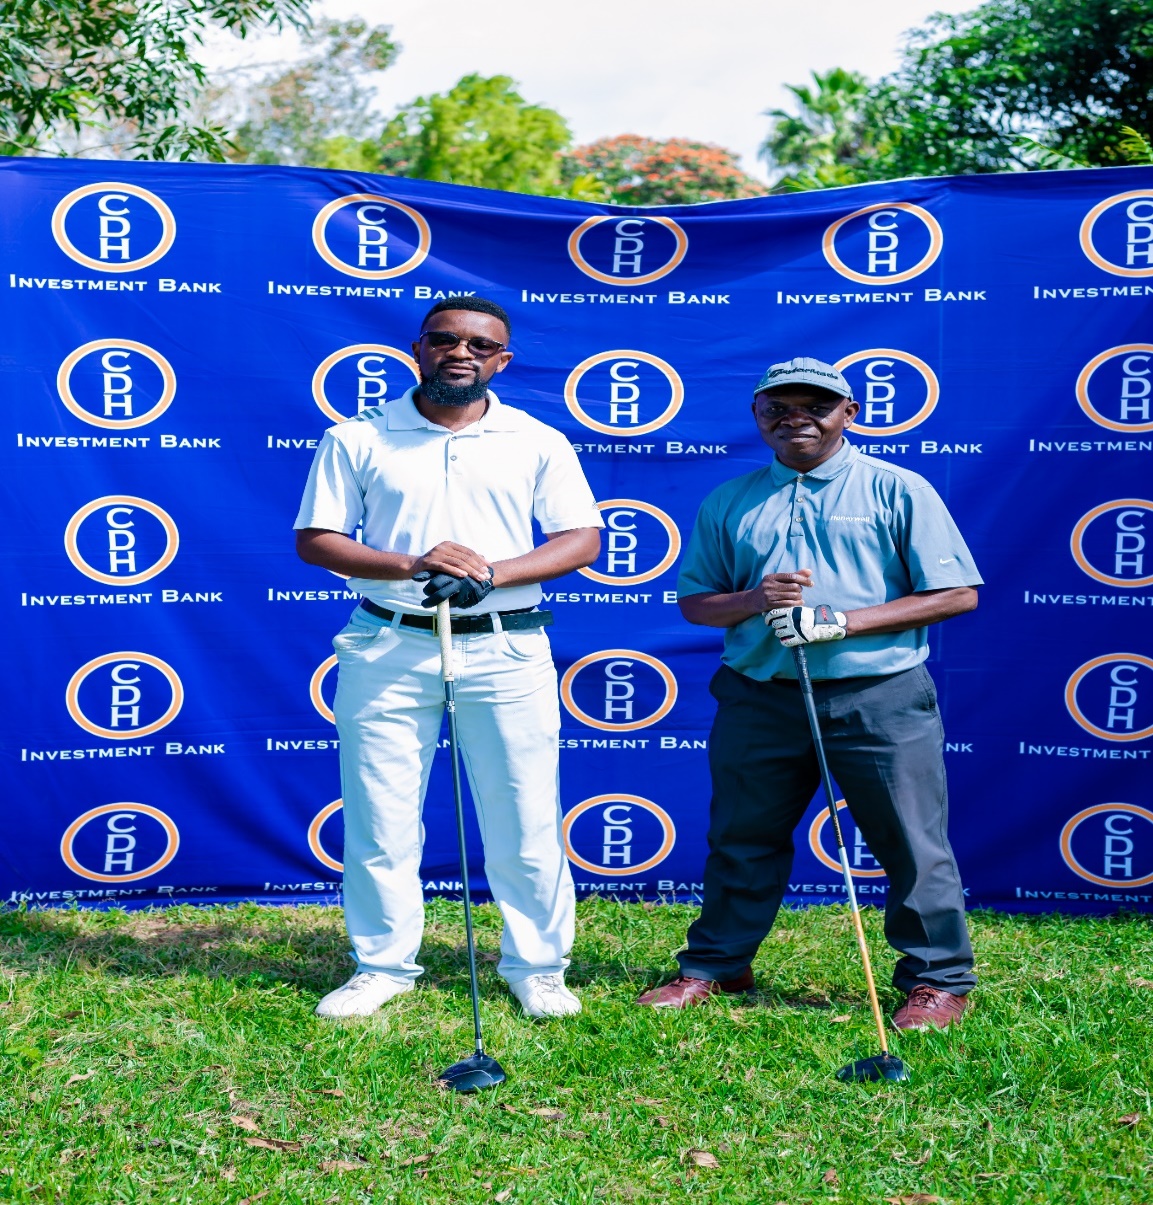 In the picture: Team 1 of Mr Chifundo Lingao (Left) and Mr Sope Kaira (right) who represented CDH Investment Bank at the golf tournament